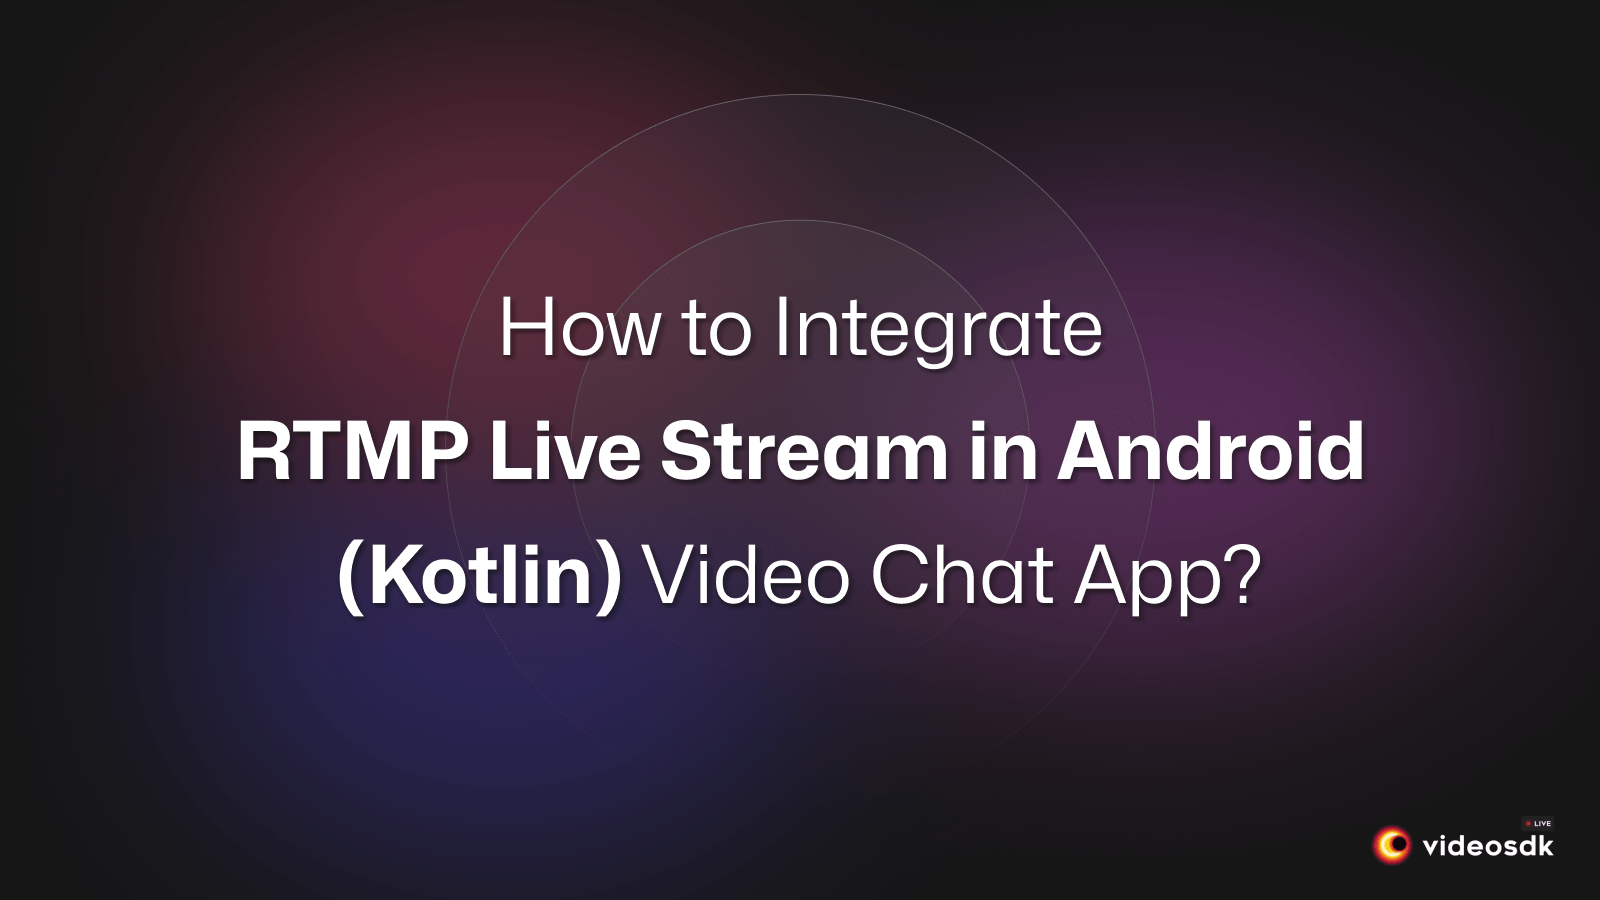 How to Integrate RTMP Live Stream in Android(Kotlin) Video Chat App?